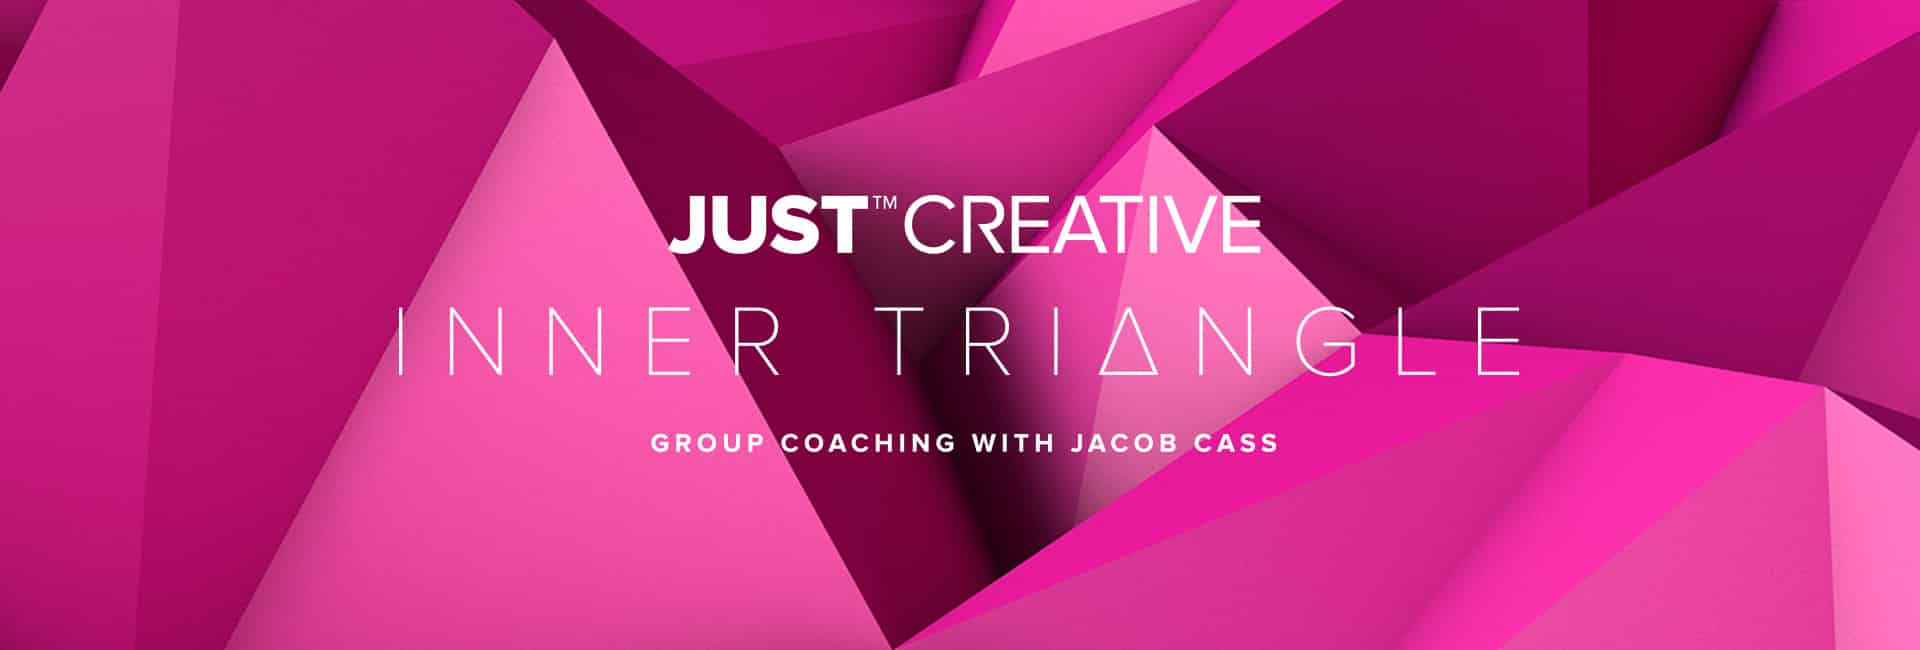 Inner Triangle Group Coaching